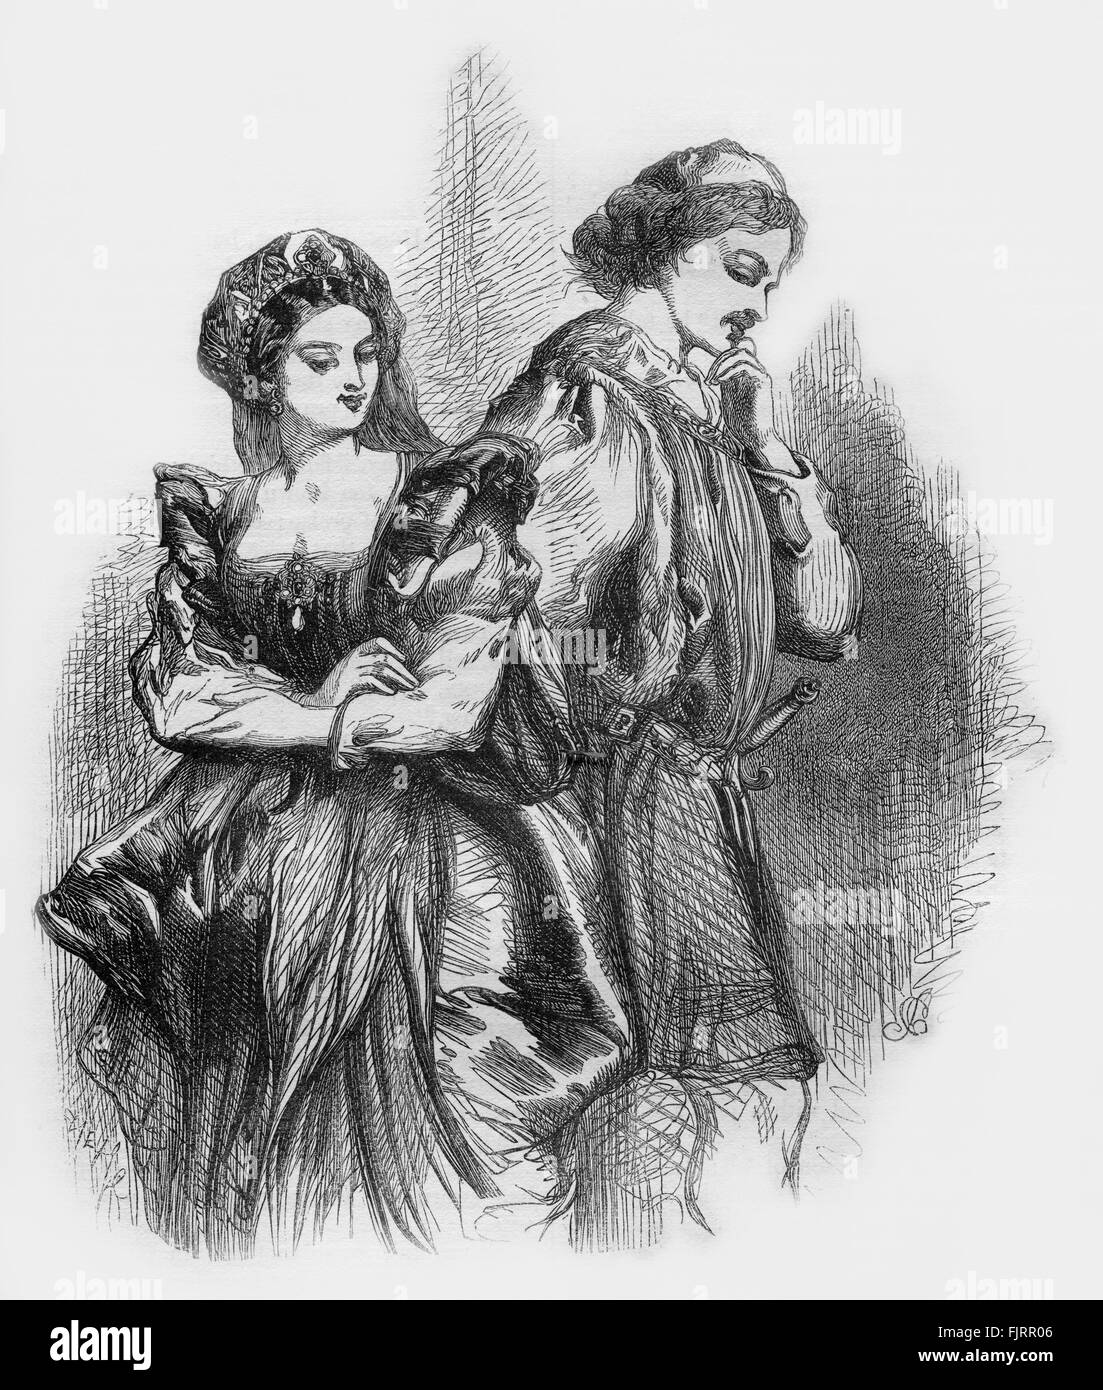 Much Ado about Nothing by William Shakaespeare. Beatrice and Benedick Act I scene  1. . Illustration by John Gilbert. English poet and playwright baptised 26 April 1564 – 23 April 1616. Stock Photo